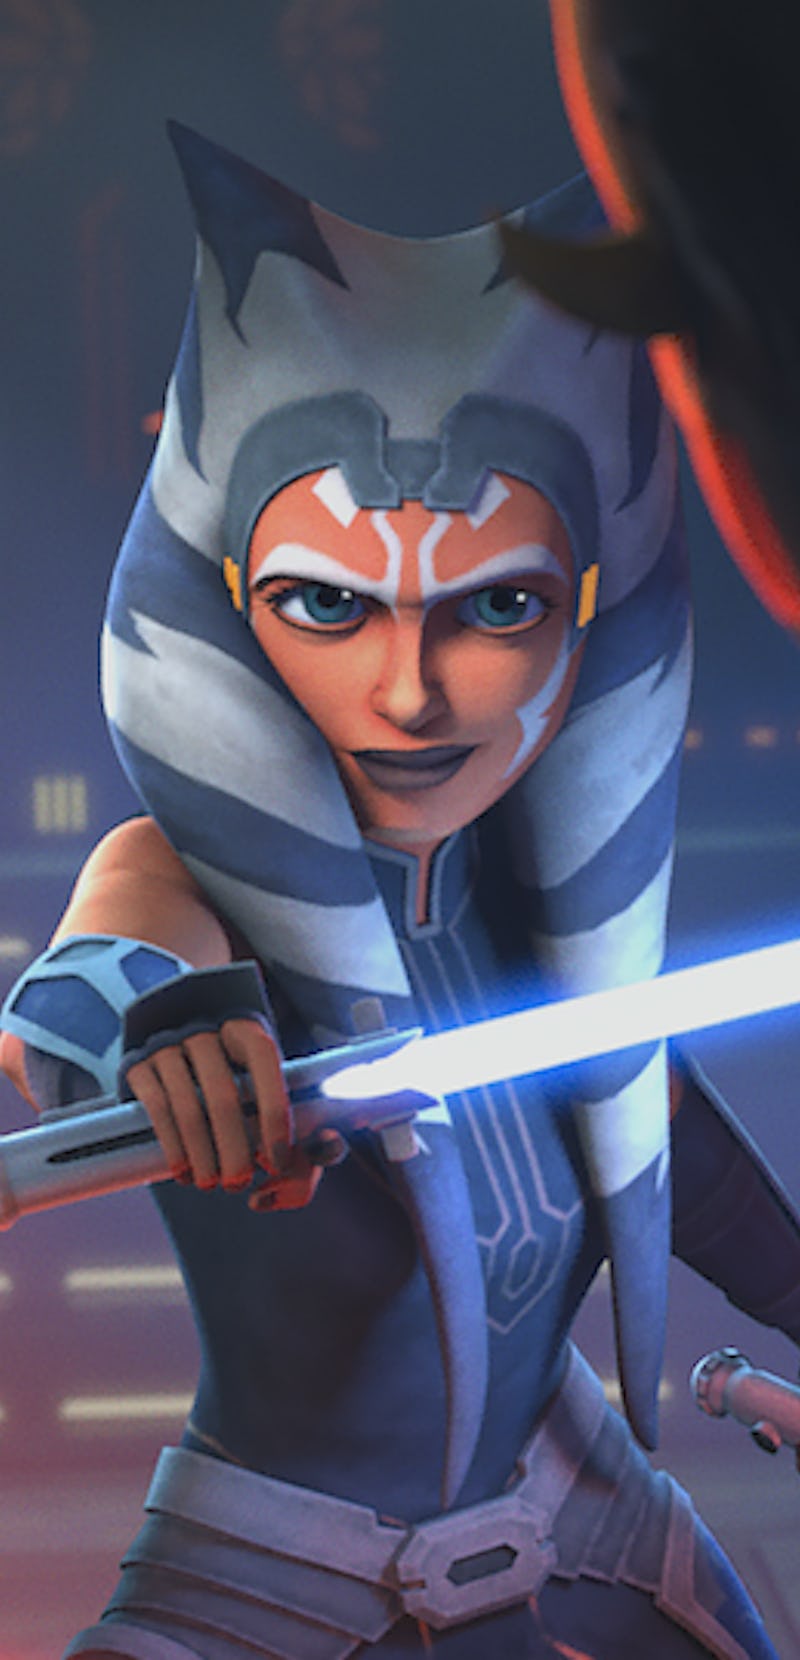 Ahsoka with a confident facial expression holding a weapon and is prepared to fight